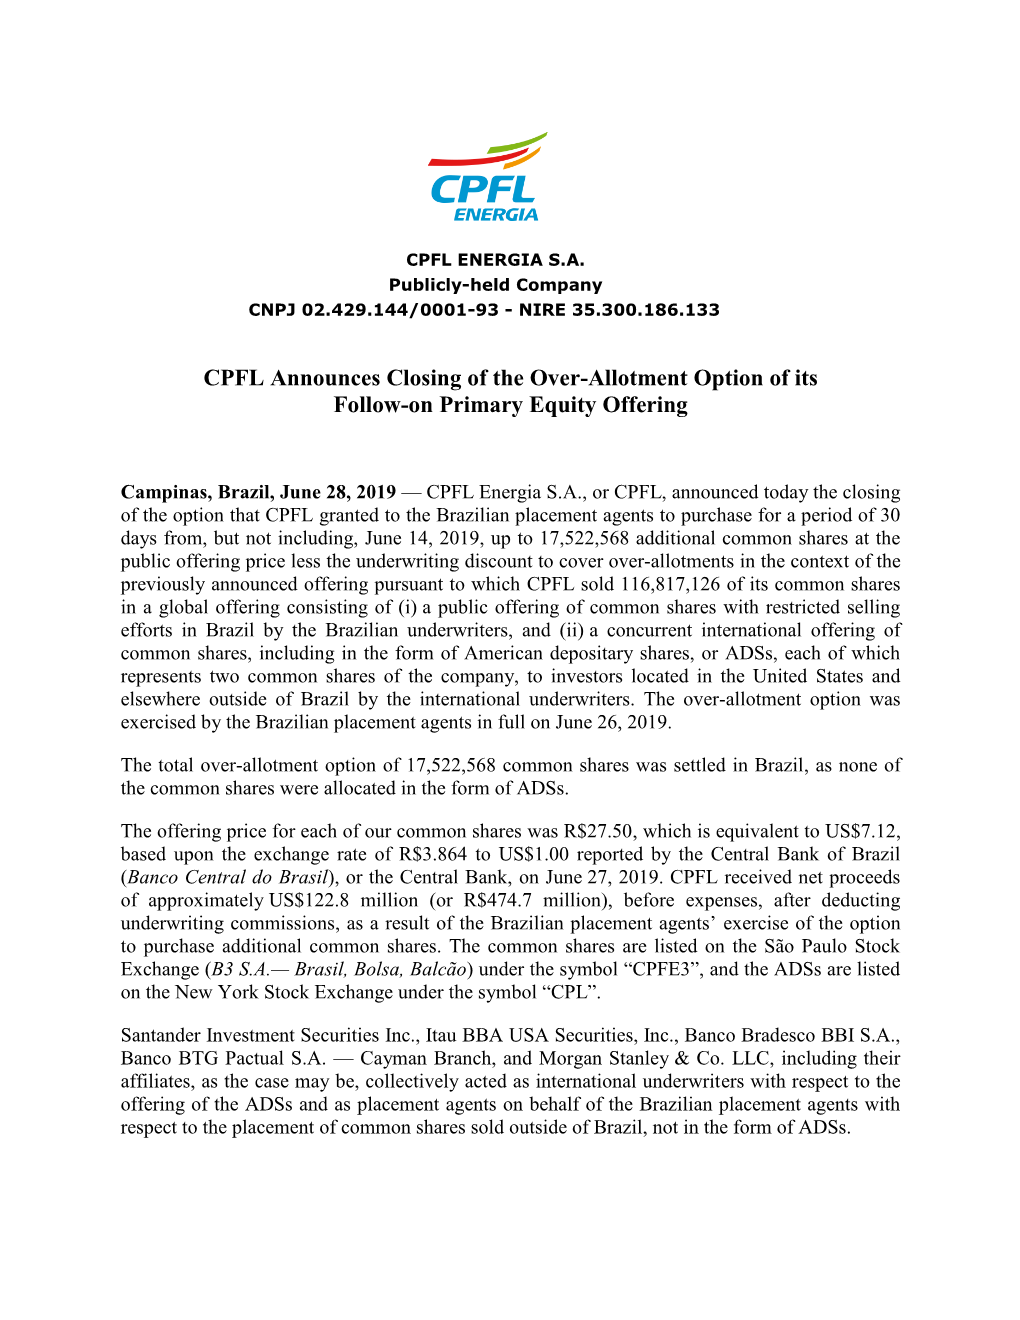 CPFL Announces Closing of the Over-Allotment Option of Its Follow-On Primary Equity Offering